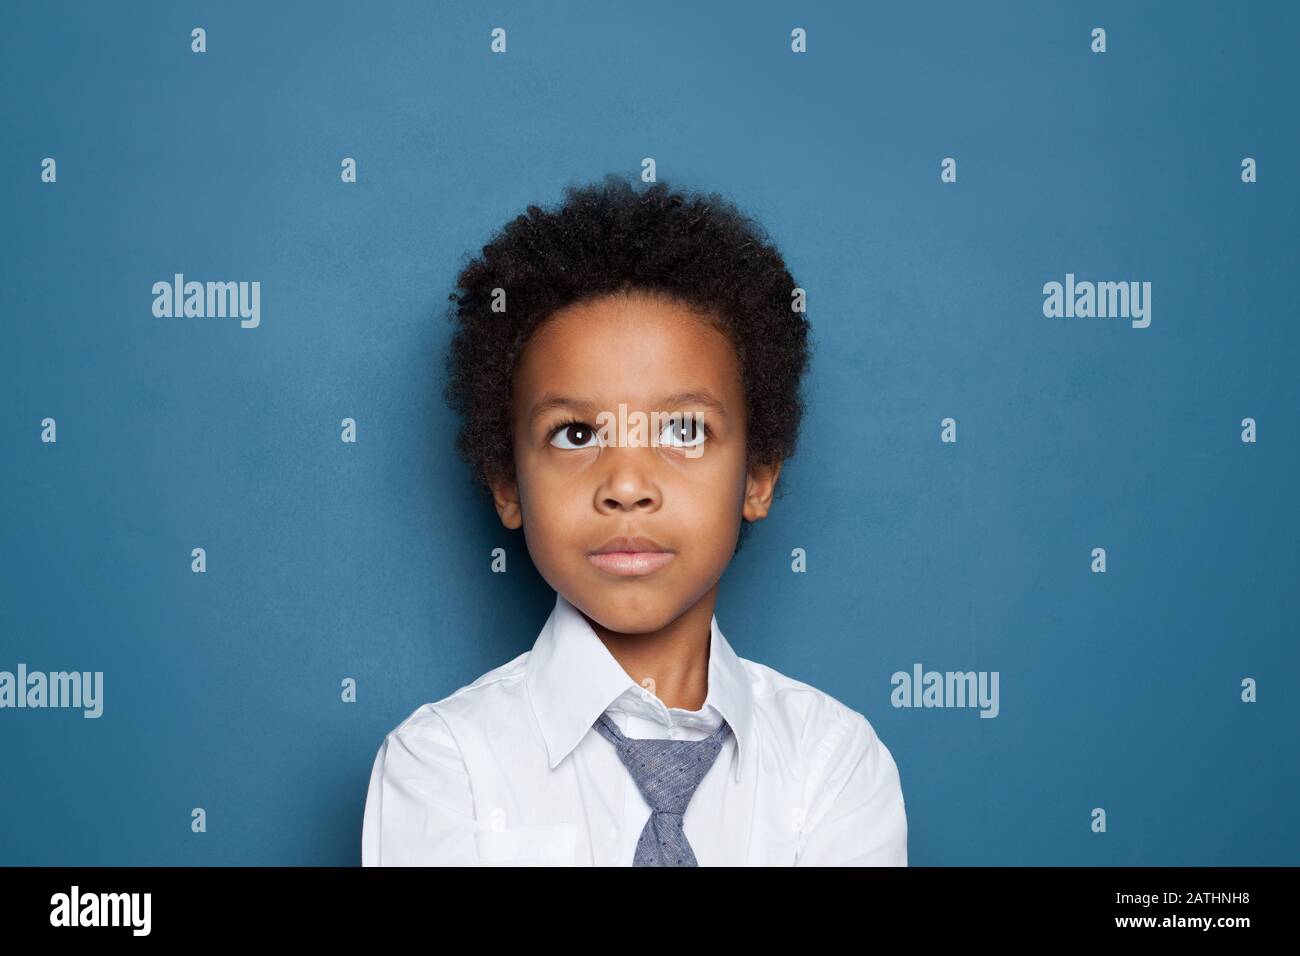 African American kid school boy pupil 6 years old on blue backgroung portrait Stock Photo